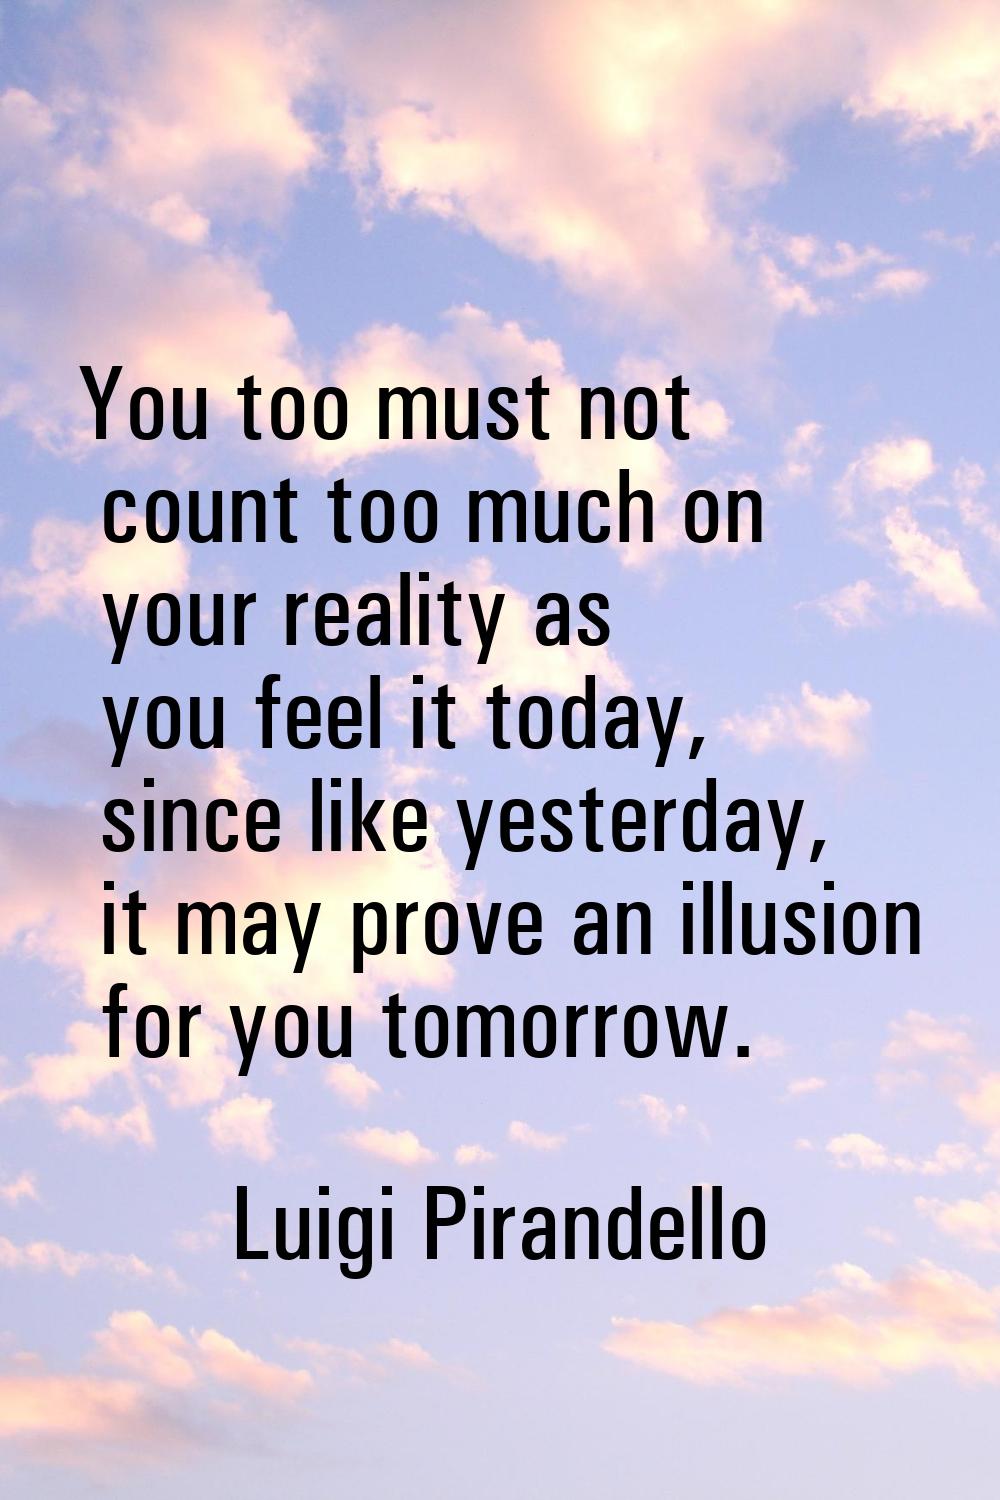 You too must not count too much on your reality as you feel it today, since like yesterday, it may 